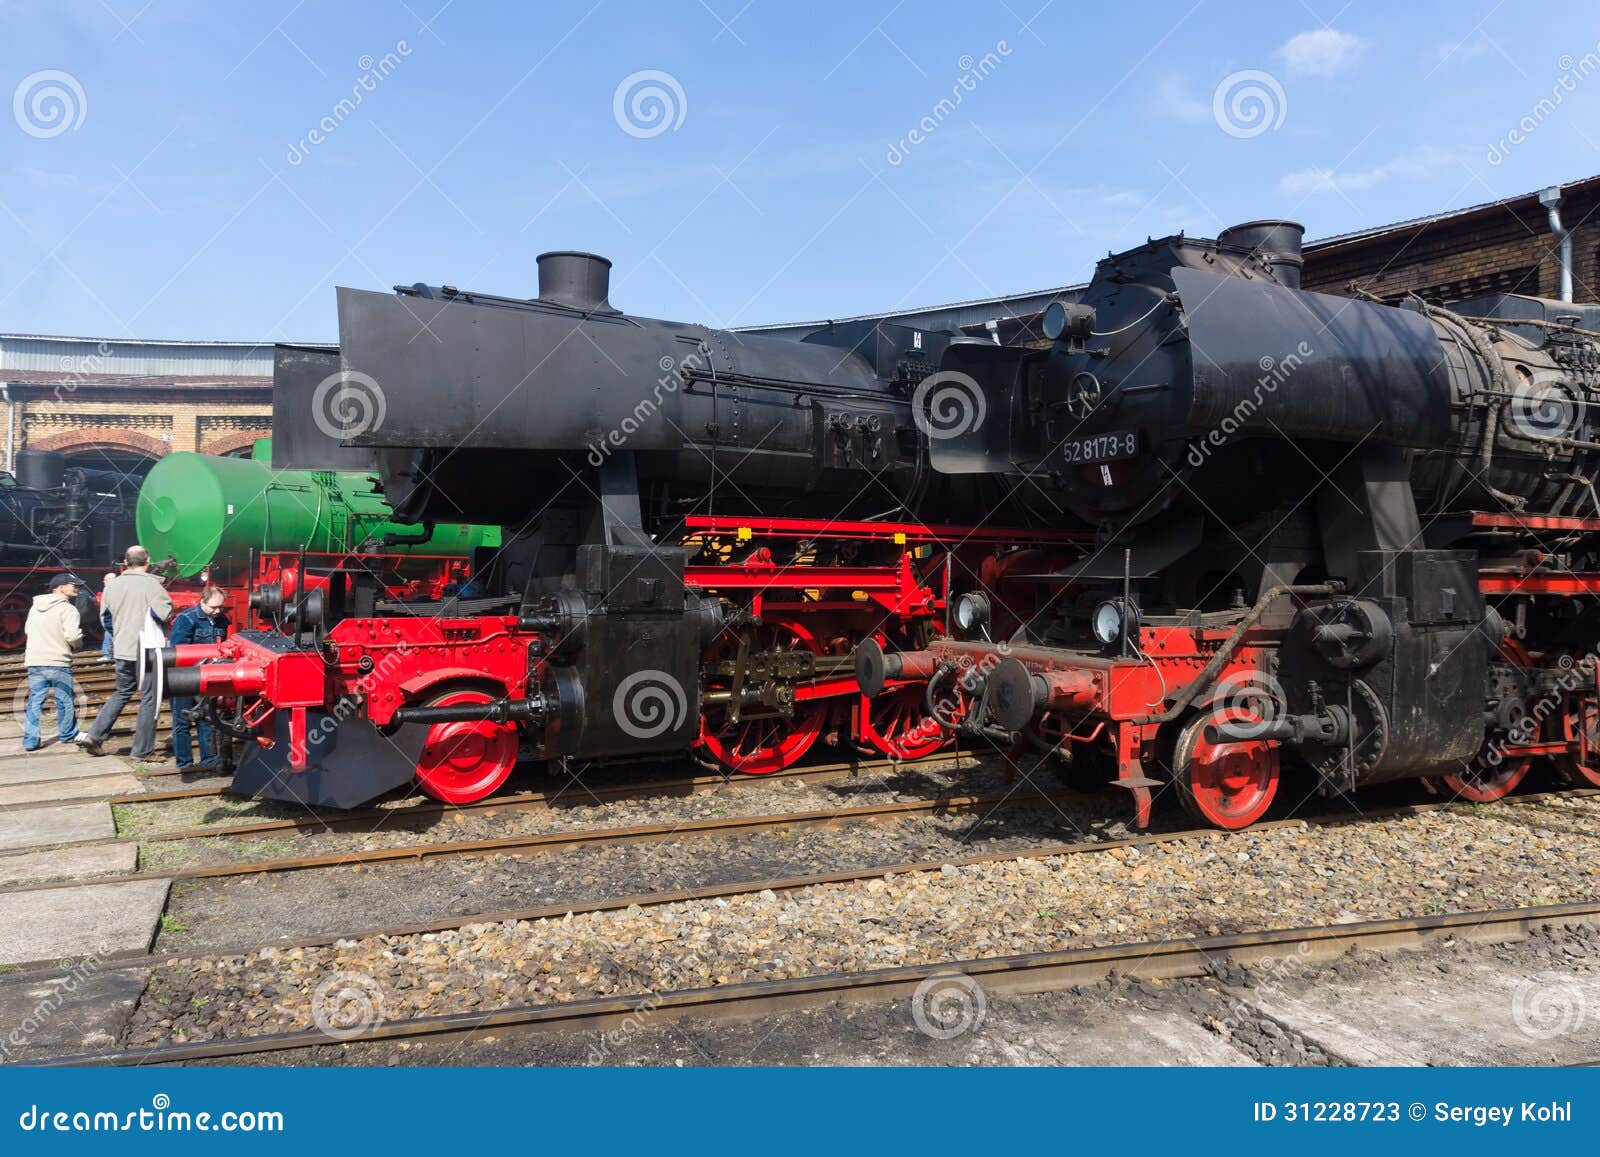 BERLIN - APRIL 20: Various steam locomotive, the Spring Festival, the exhibition in the Rail yard Schoeneweide, April 20, 2013 in Berlin, Germany